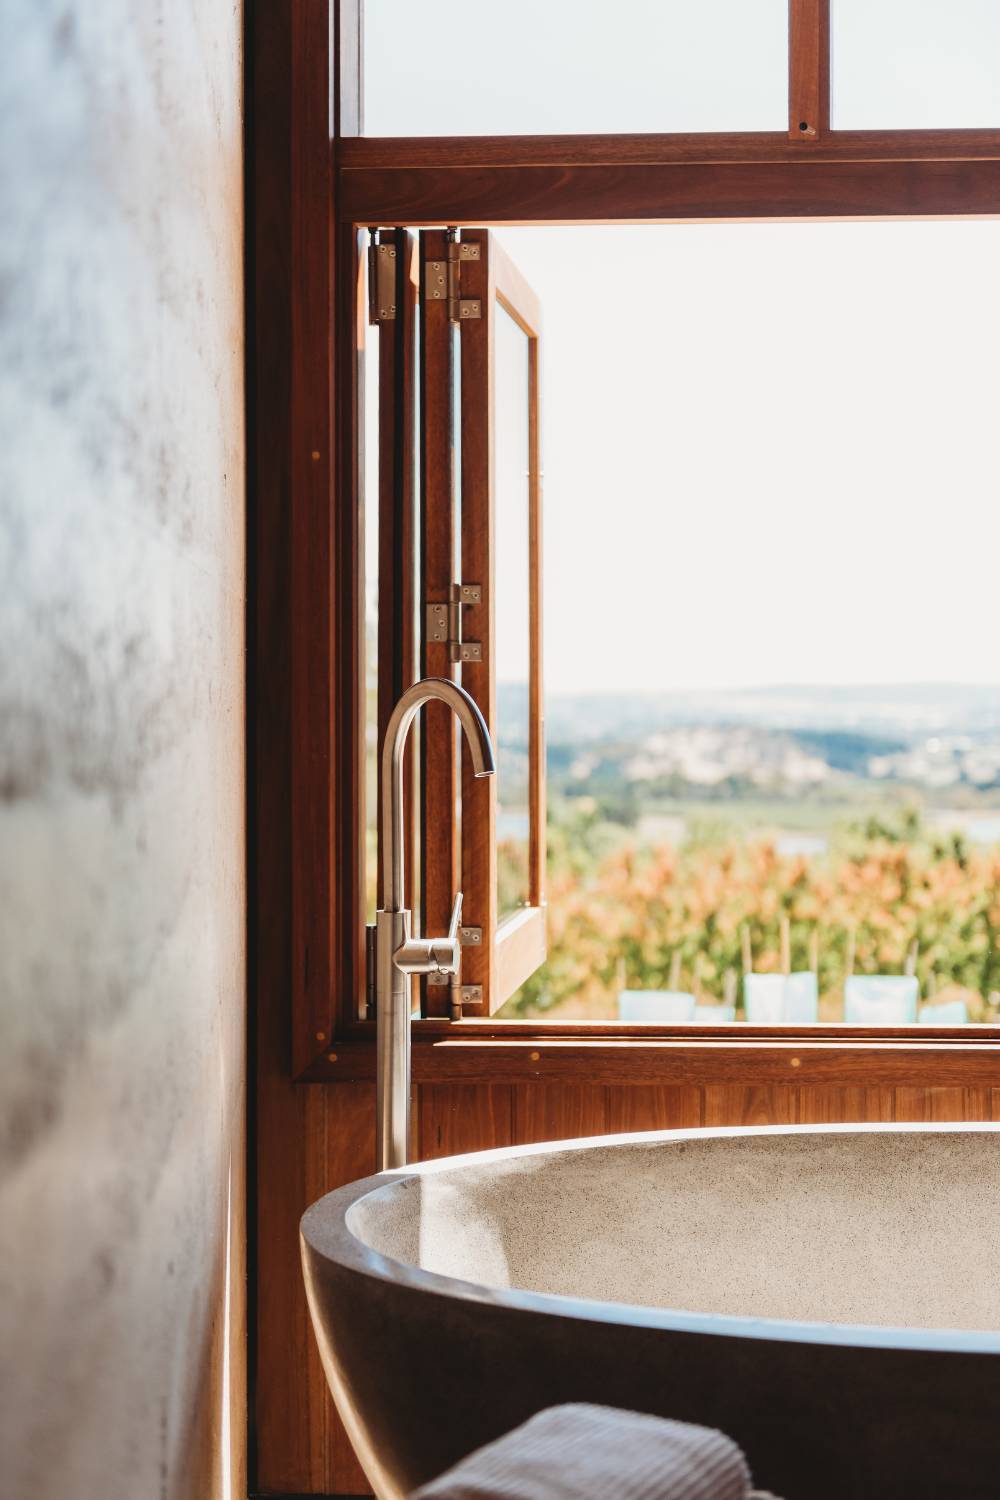 An inviting scene showcasing a bathtub positioned next to a window with a breathtaking view of Orange, New South Wales. The image captures the luxurious ambiance of the setting, with the bathtub elegantly adorned and the window framing a stunning vista of rolling hills and verdant landscapes.